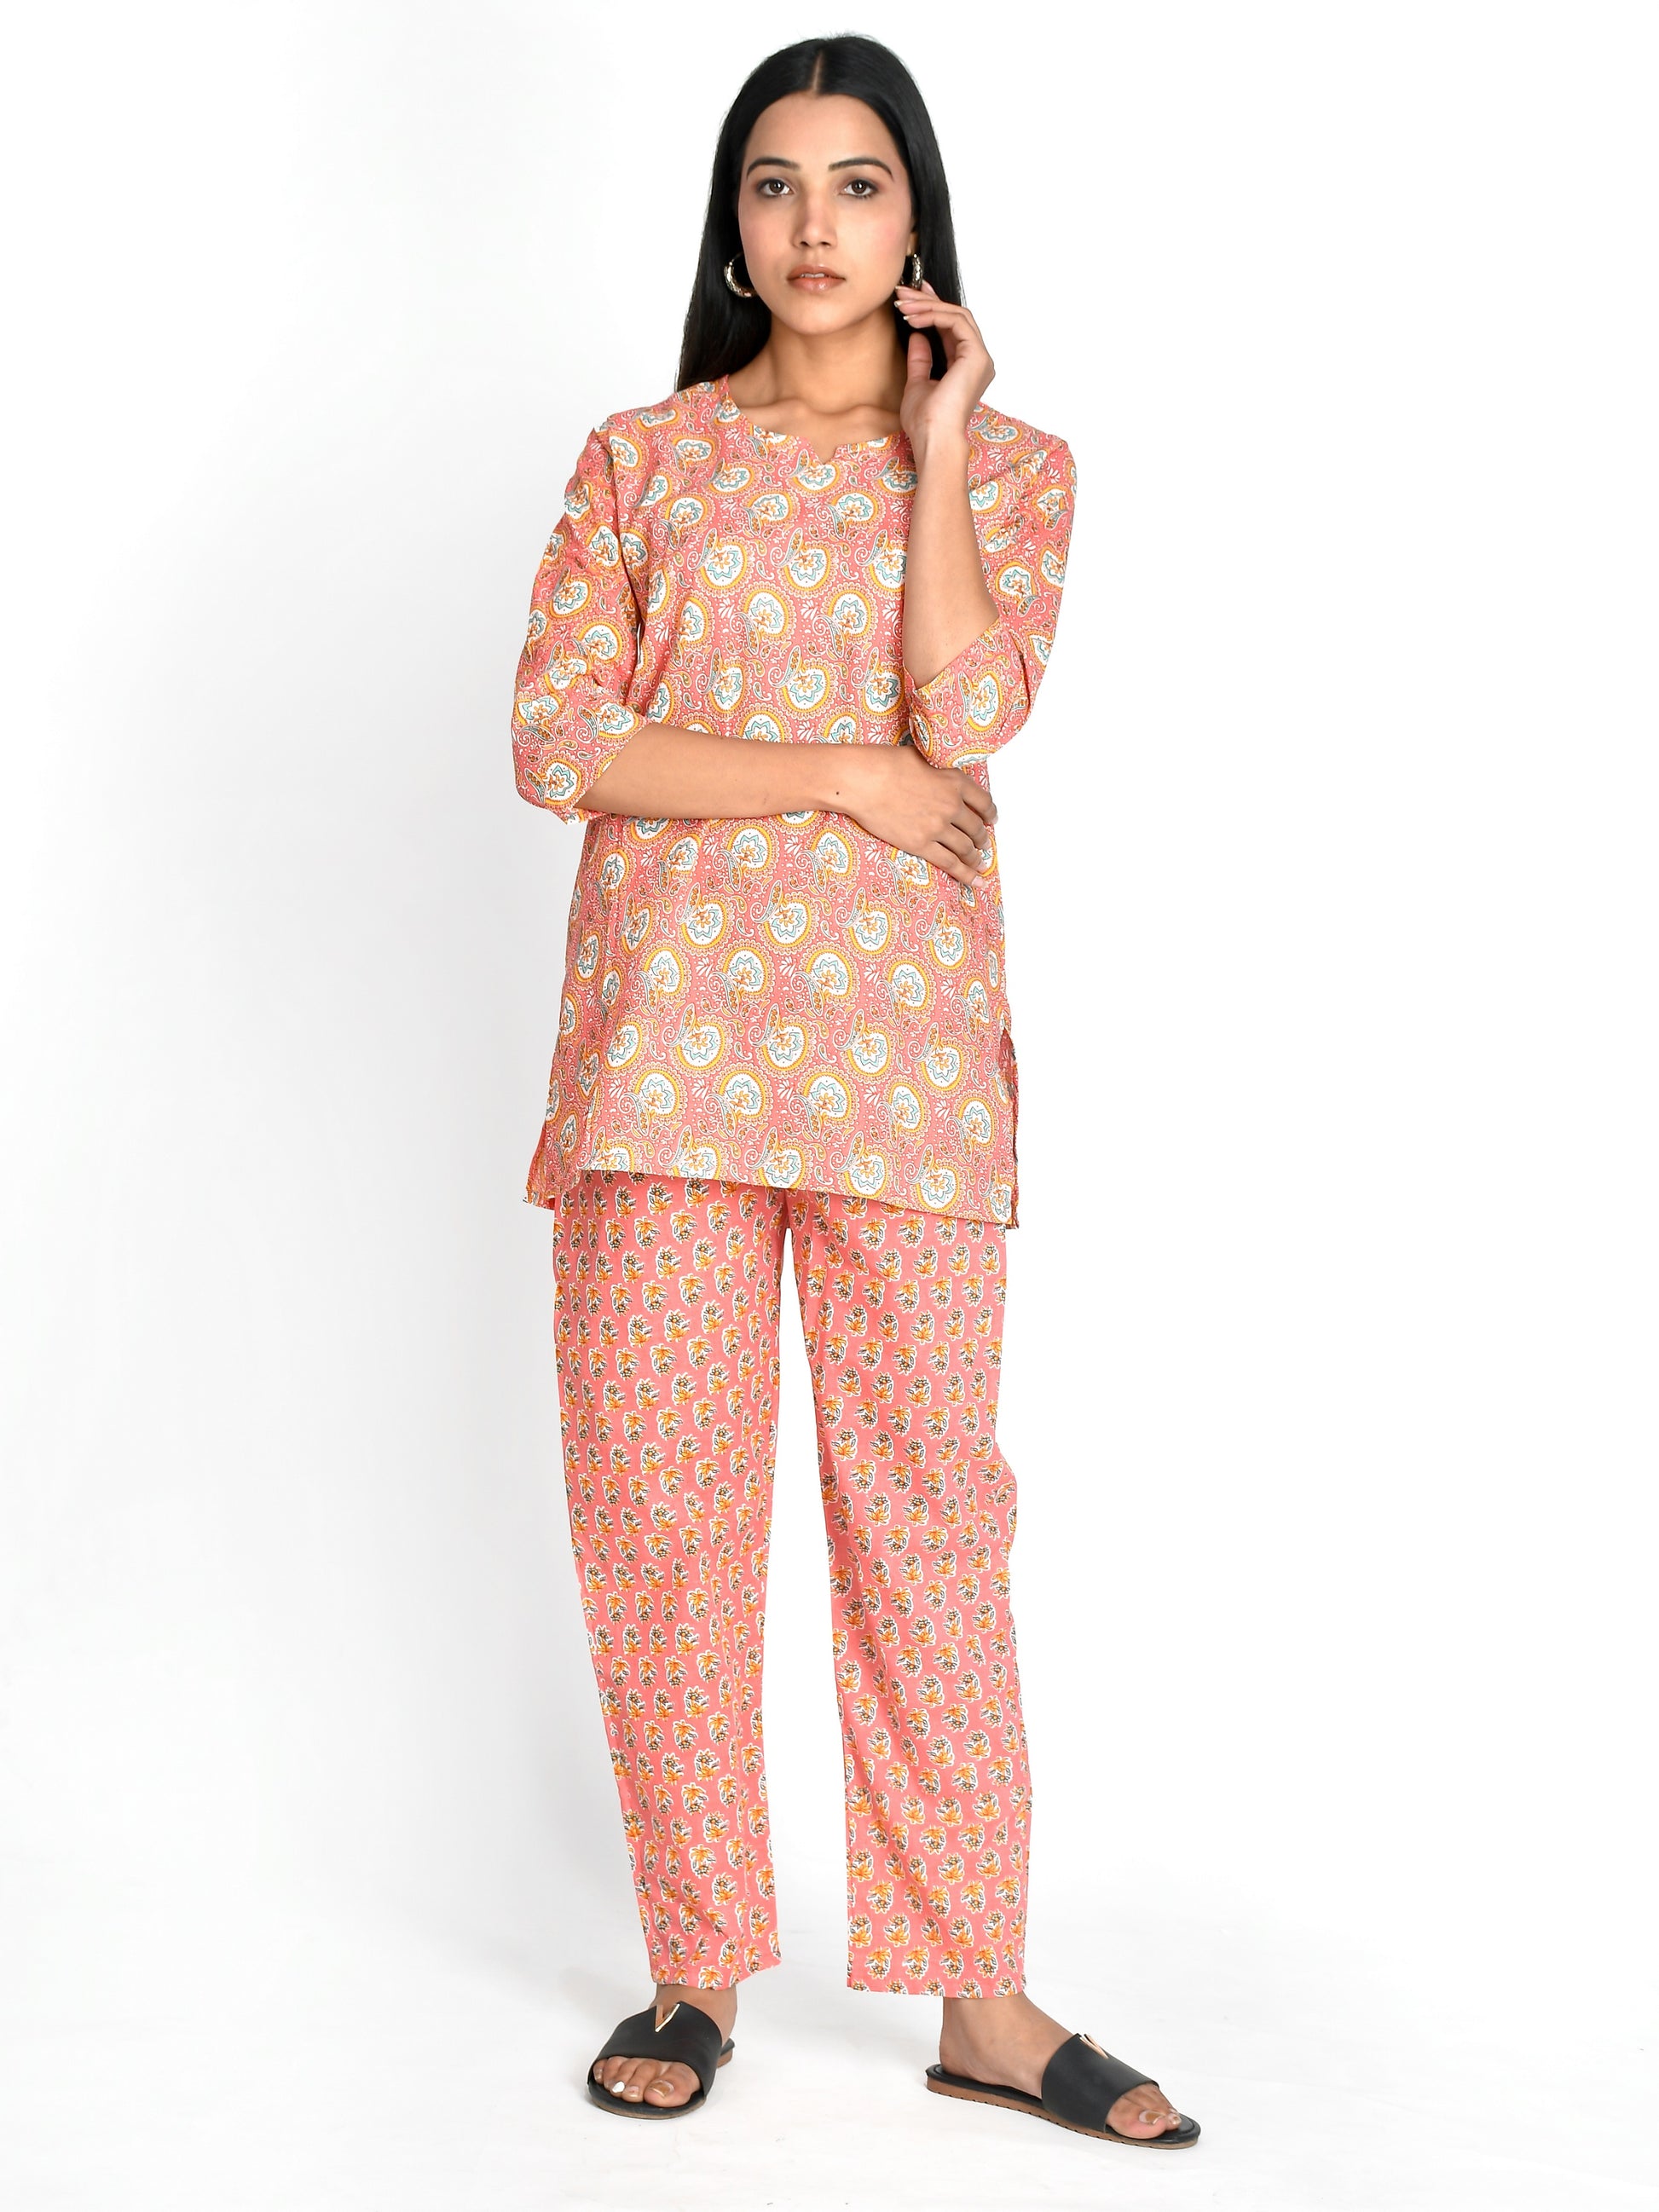 Stay comfortable and stylish with our Women Peach Colored Night Suit. Made for girls and women, this night suit is perfect for a good night's sleep or lounging at home. Made from high-quality materials, it offers a perfect balance of comfort and fashion. Elevate your sleepwear game with this must-have set.